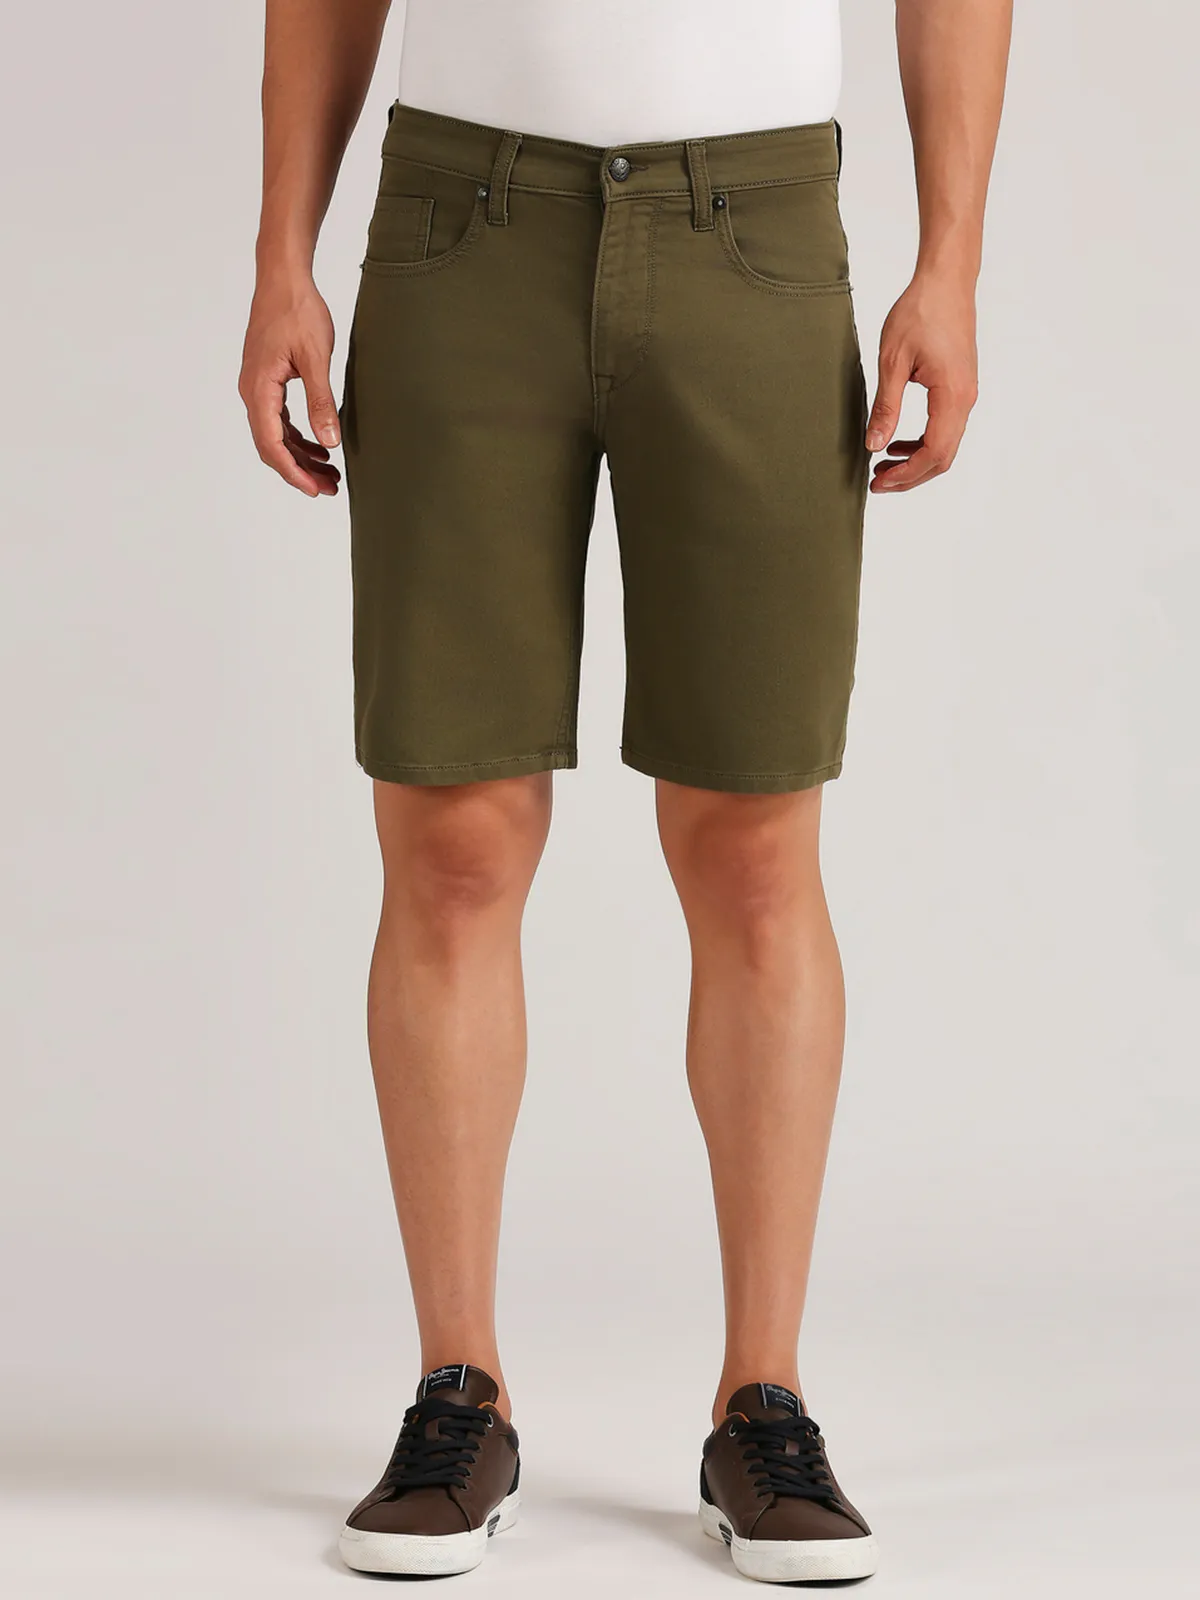 PEPE JEANS olive solid slim fit shorts